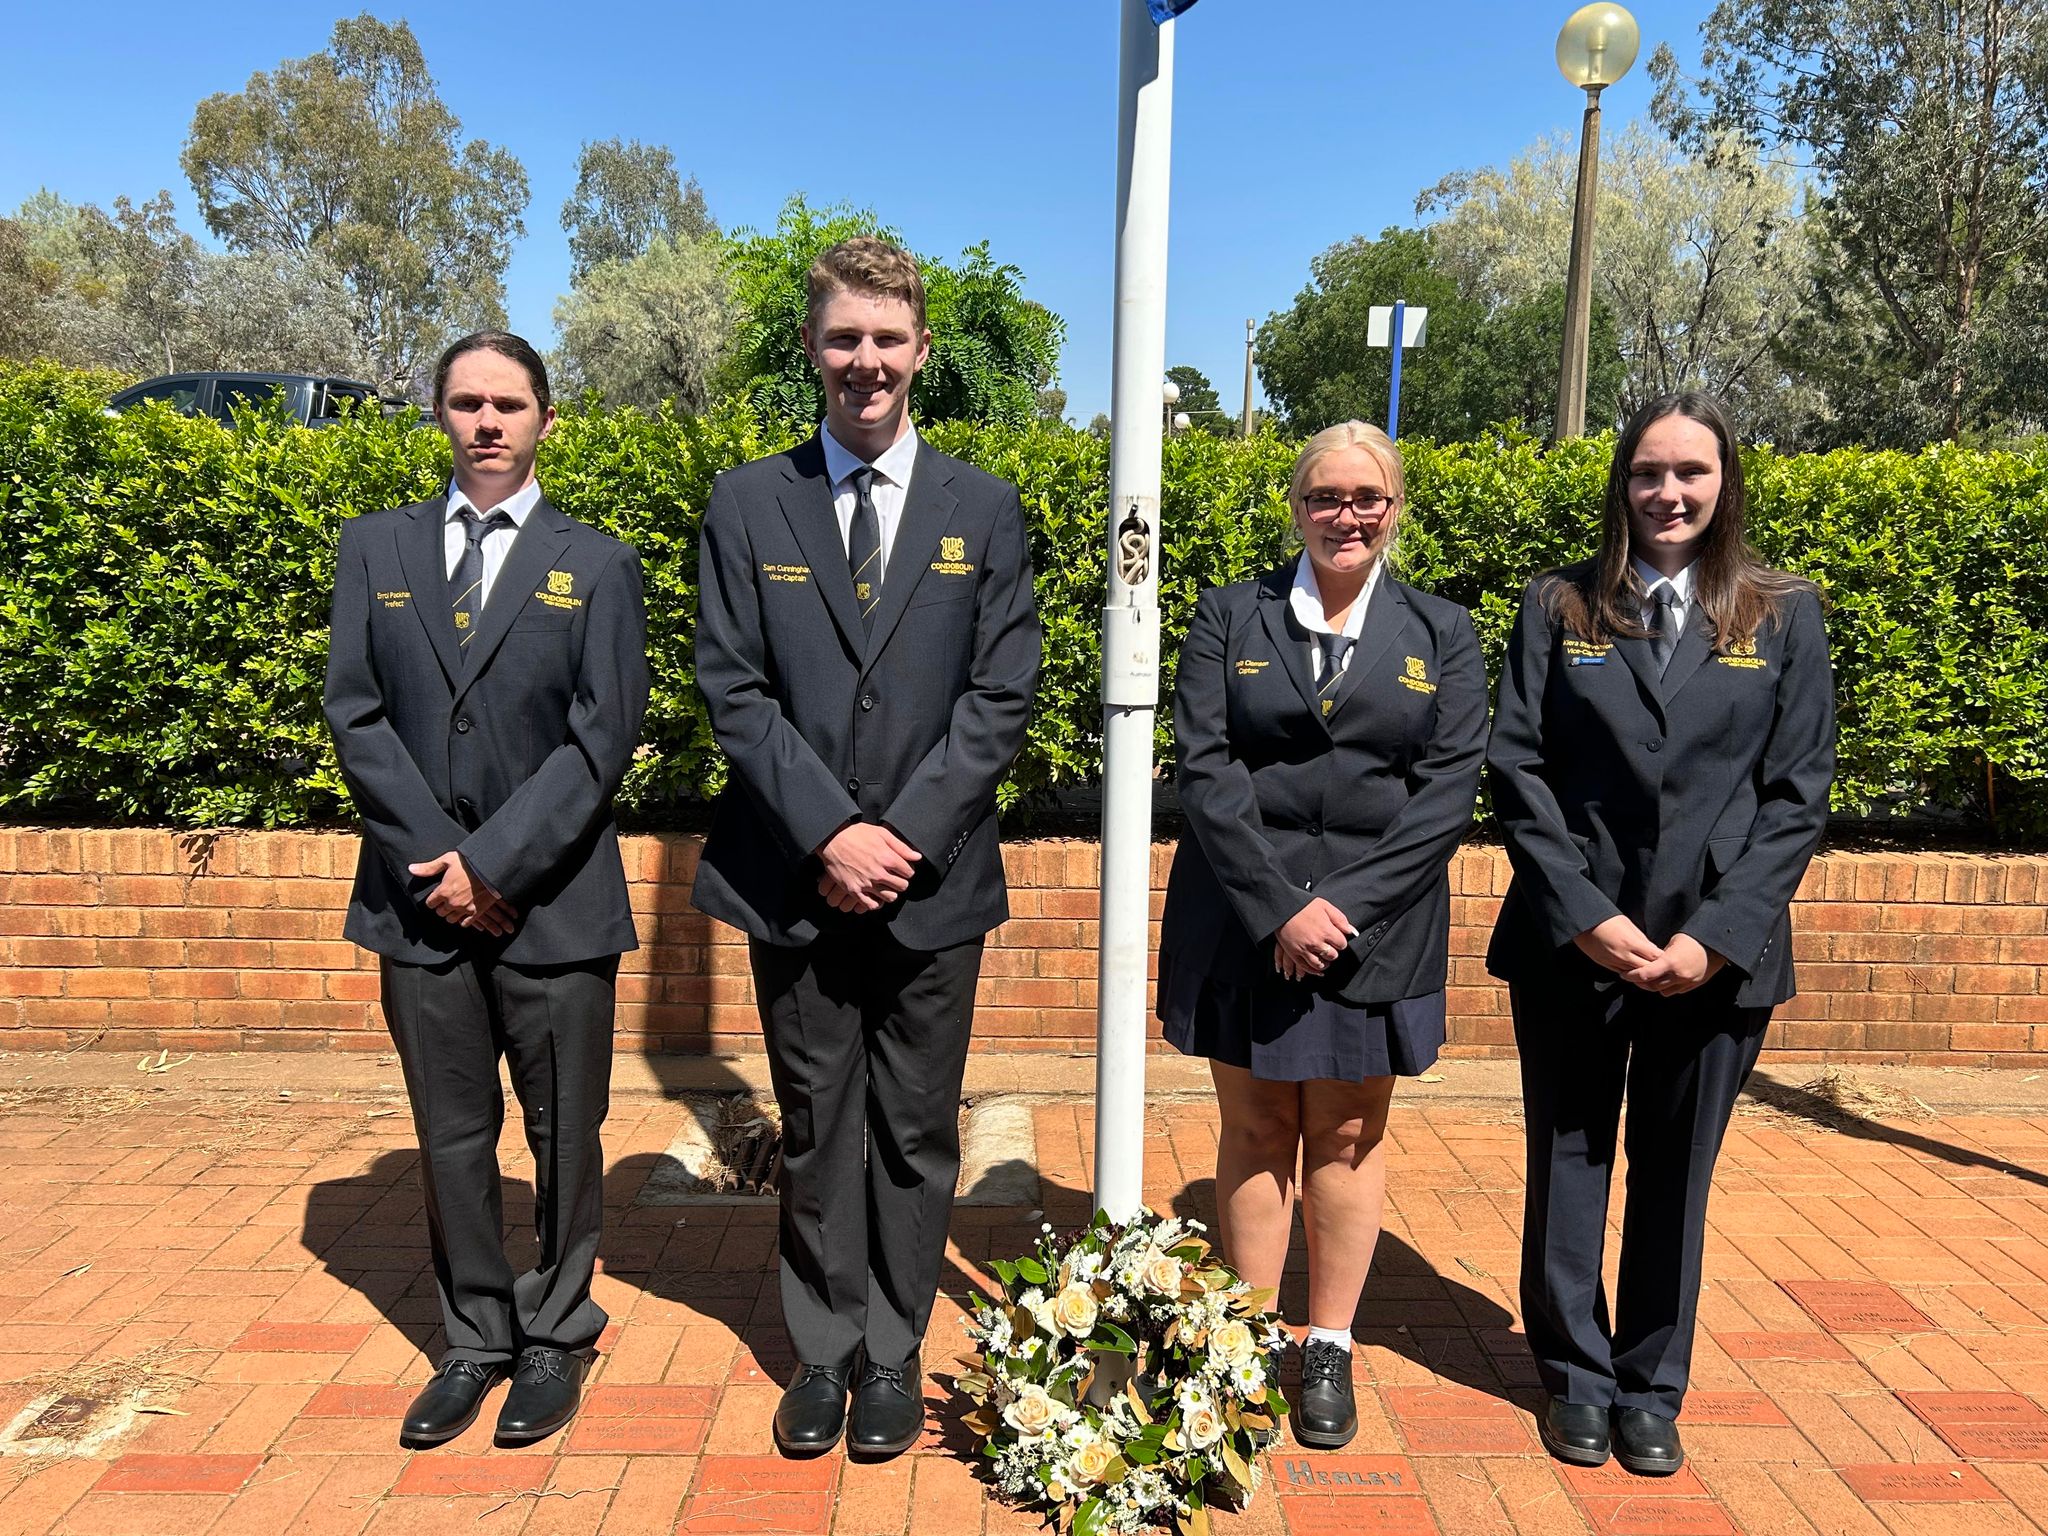 Condobolin High School Prefect Errol Packham, Condobolin High School Vice-Captain Sam Cunningham, Condobolin High School Captain Bella Clemson, and Condobolin High School Vice-Captain Kiera Stevenson took part in the School’s Remembrance Day Commemorative Service on Friday, 10 November. Image Credit: Condobolin High School Facebook Page.